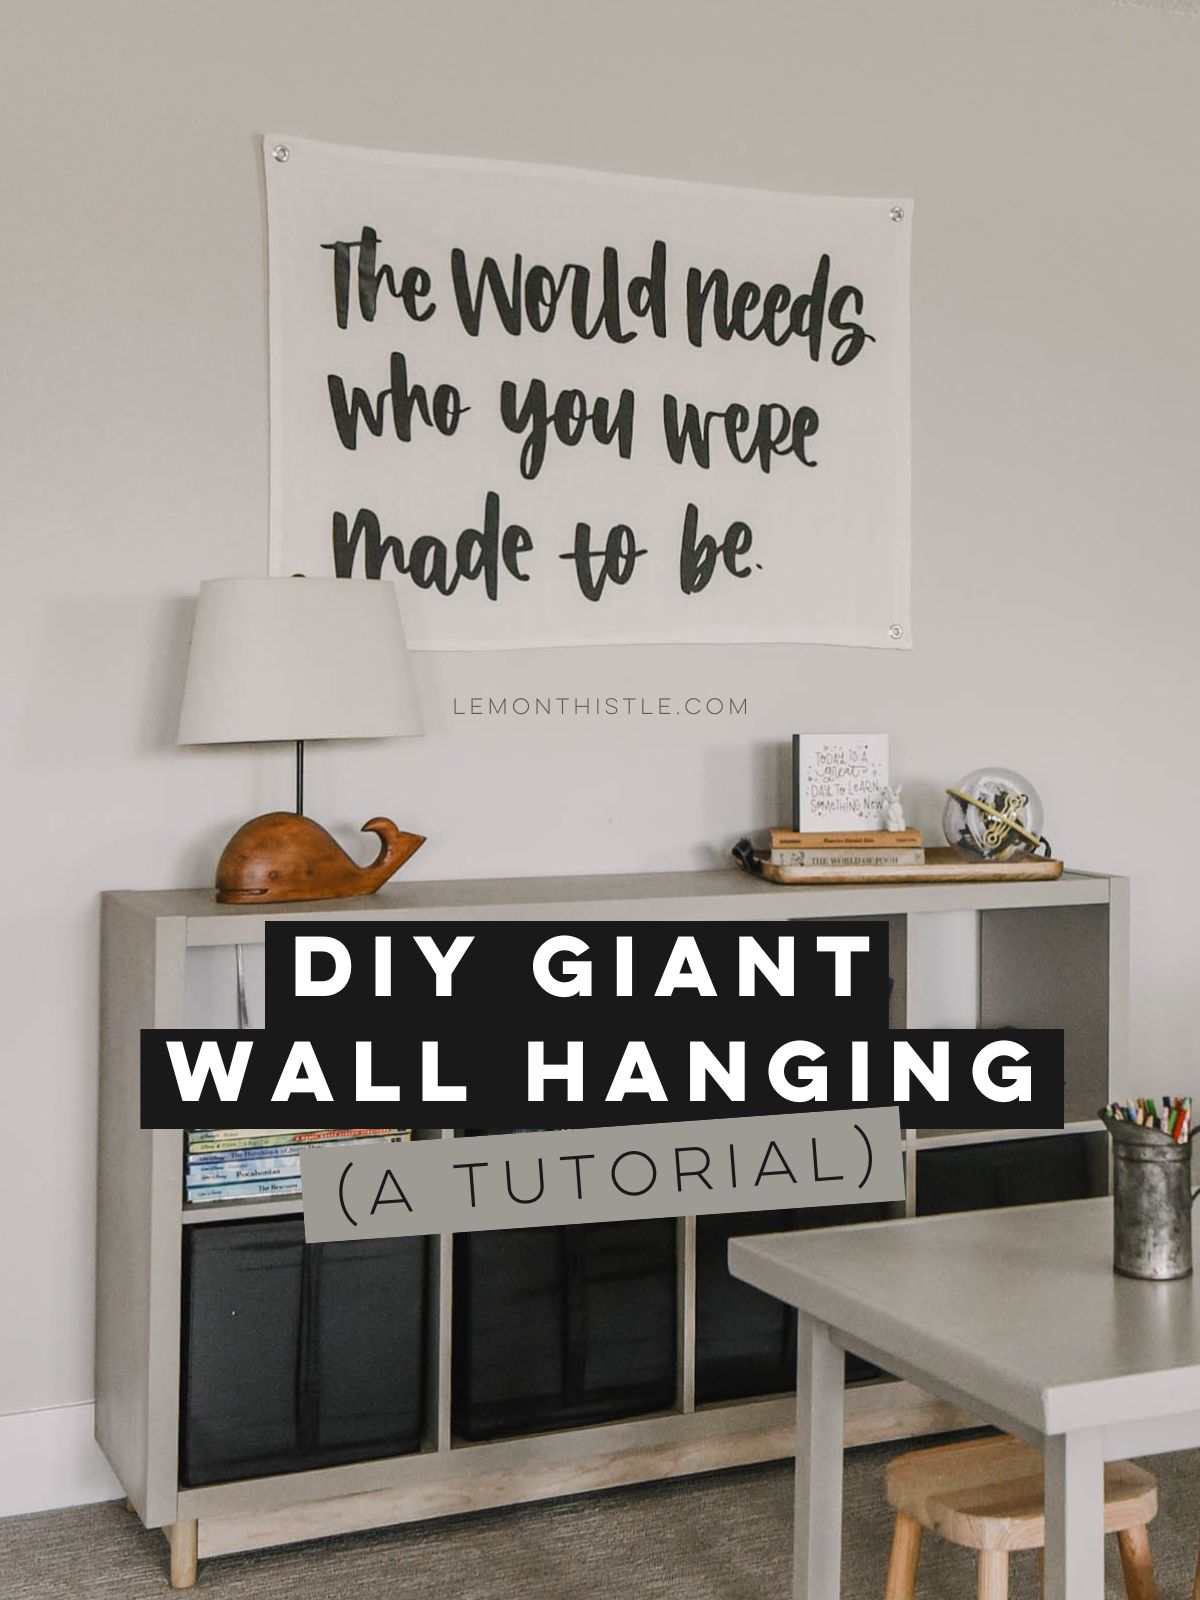 giant wall hanging that says 'the world needs who you were made to be' in playroom. Text over reads: DIY giant wall hanging (a tutorial)